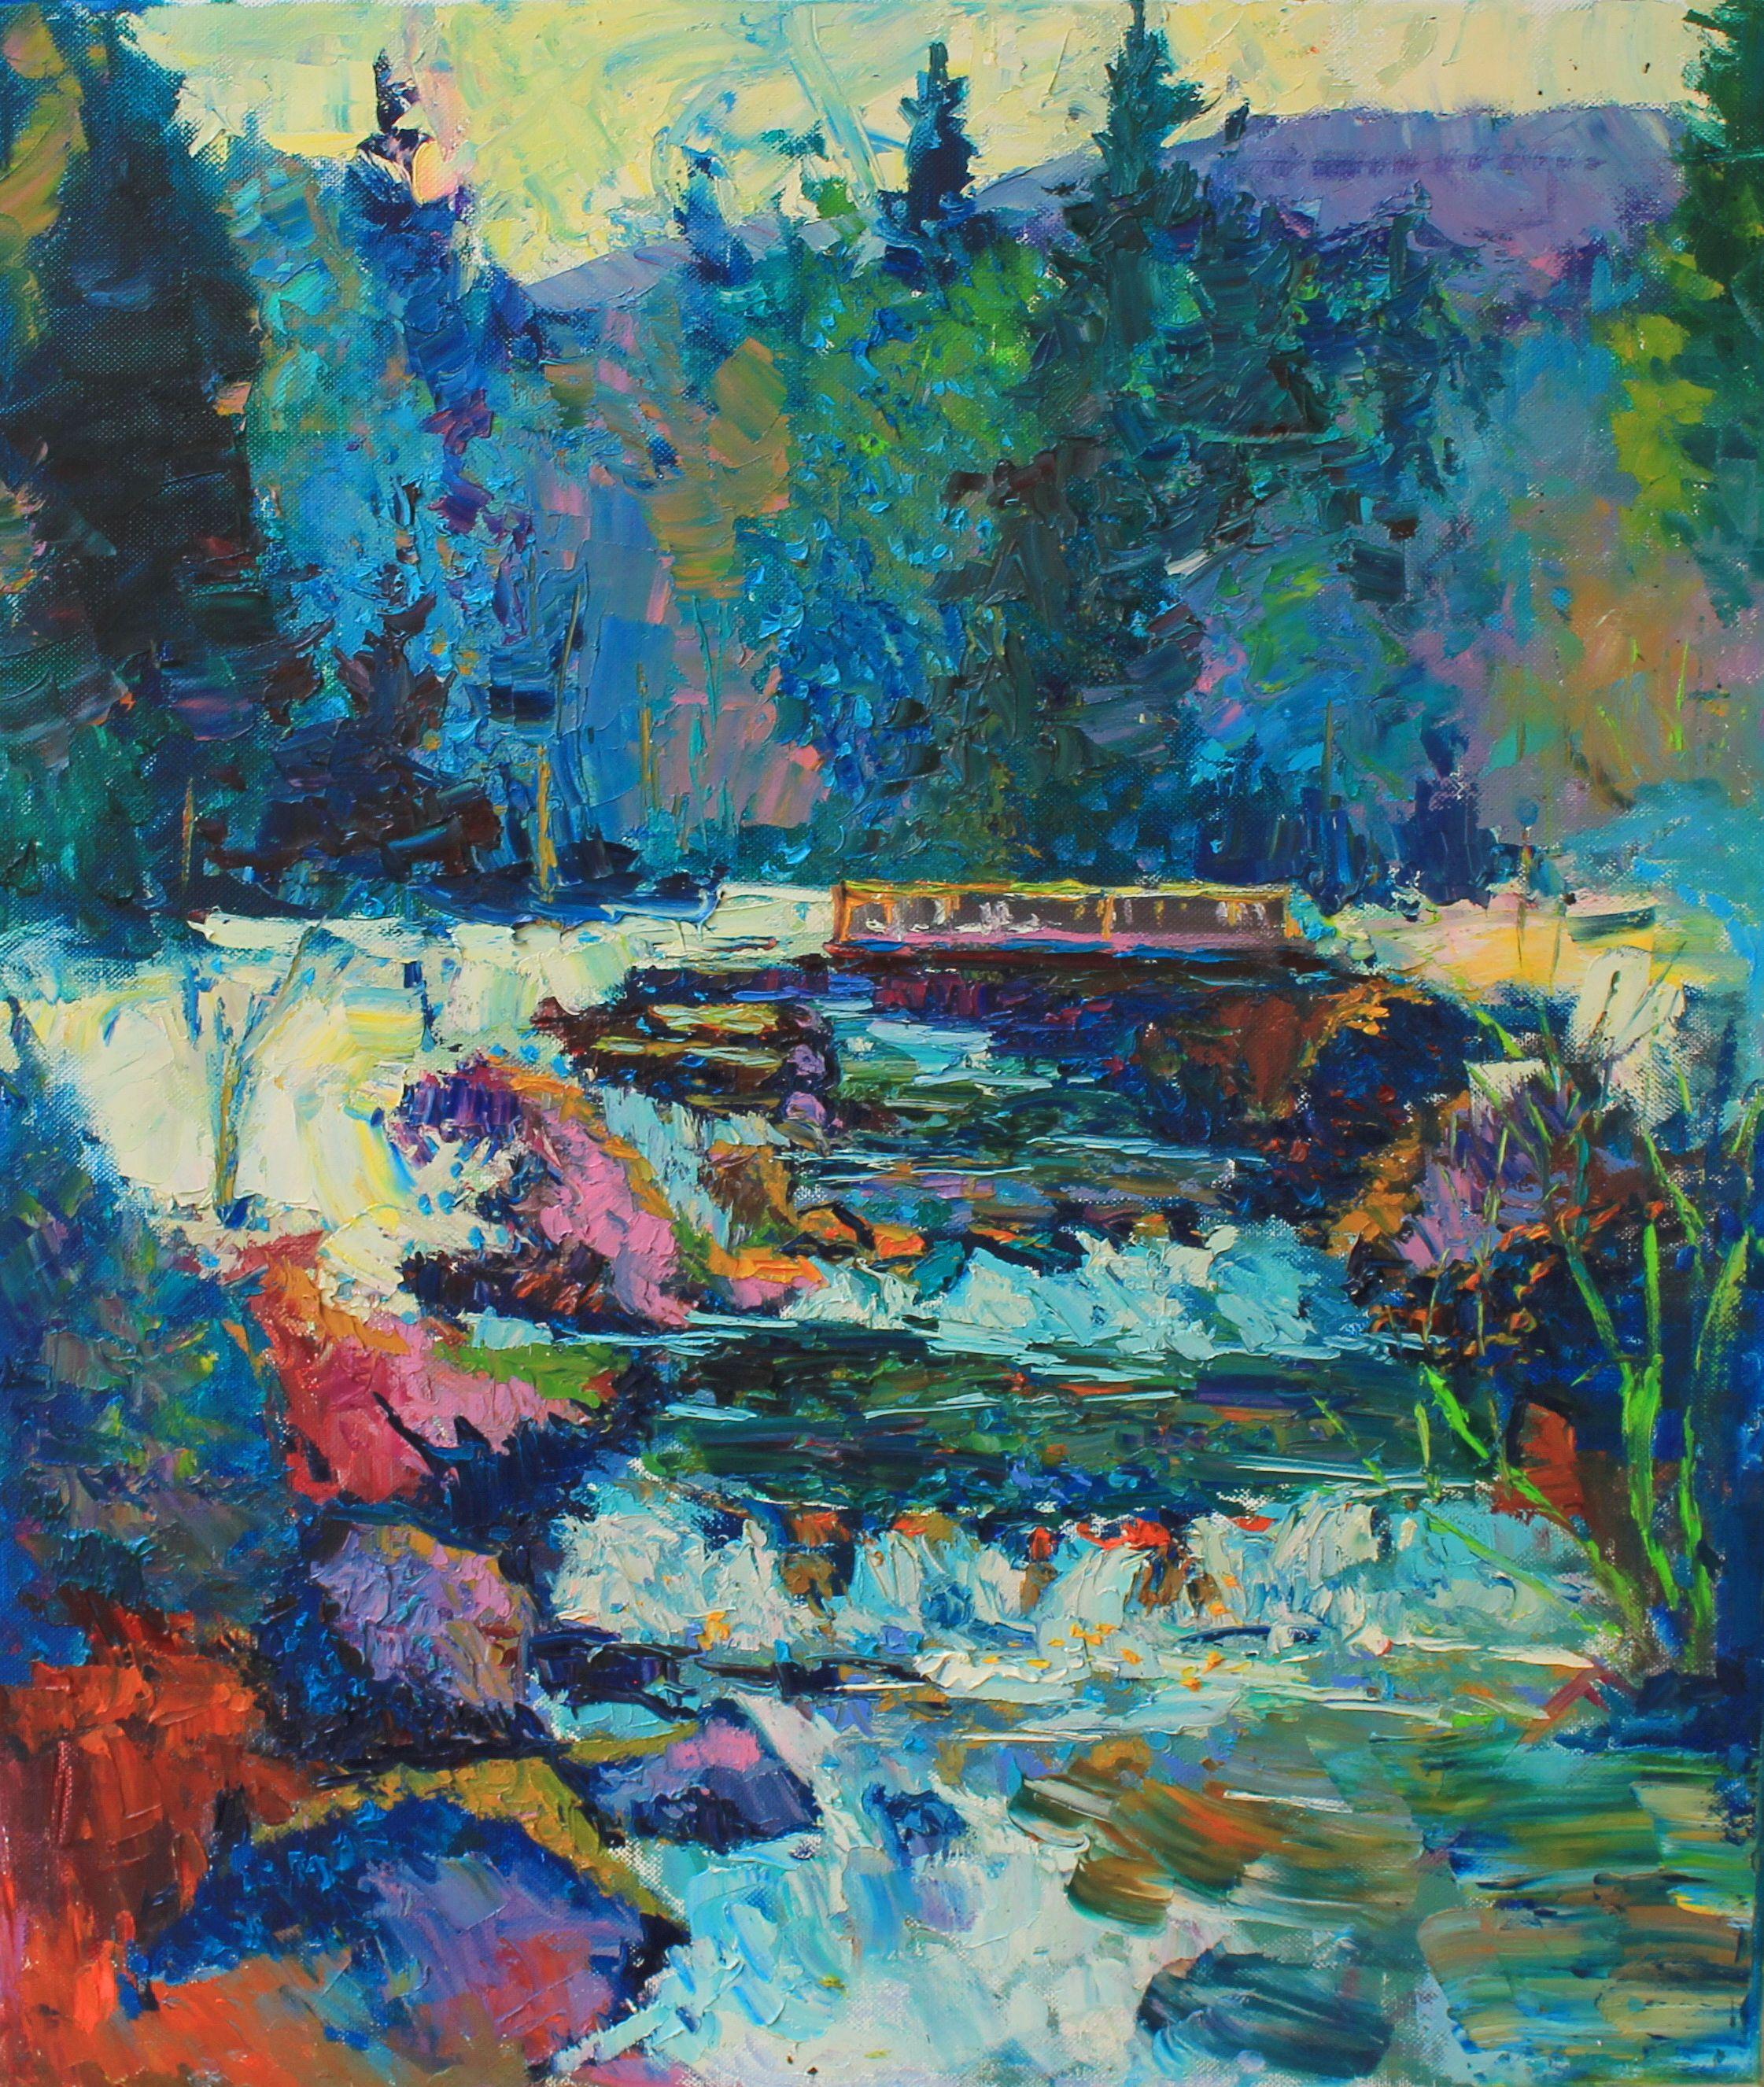 Original Oil painting by Ukrainian artist Evgeny Chernyakovsky    "River"  60.0 X 70.0 CM / 23.6X 27.5 IN  HIGH QUALITY oil on canvas  Signed on the front and back  Dated 2020  Good condition  GUARANTEE OF AUTHENTICITY   :: Painting :: Impressionist